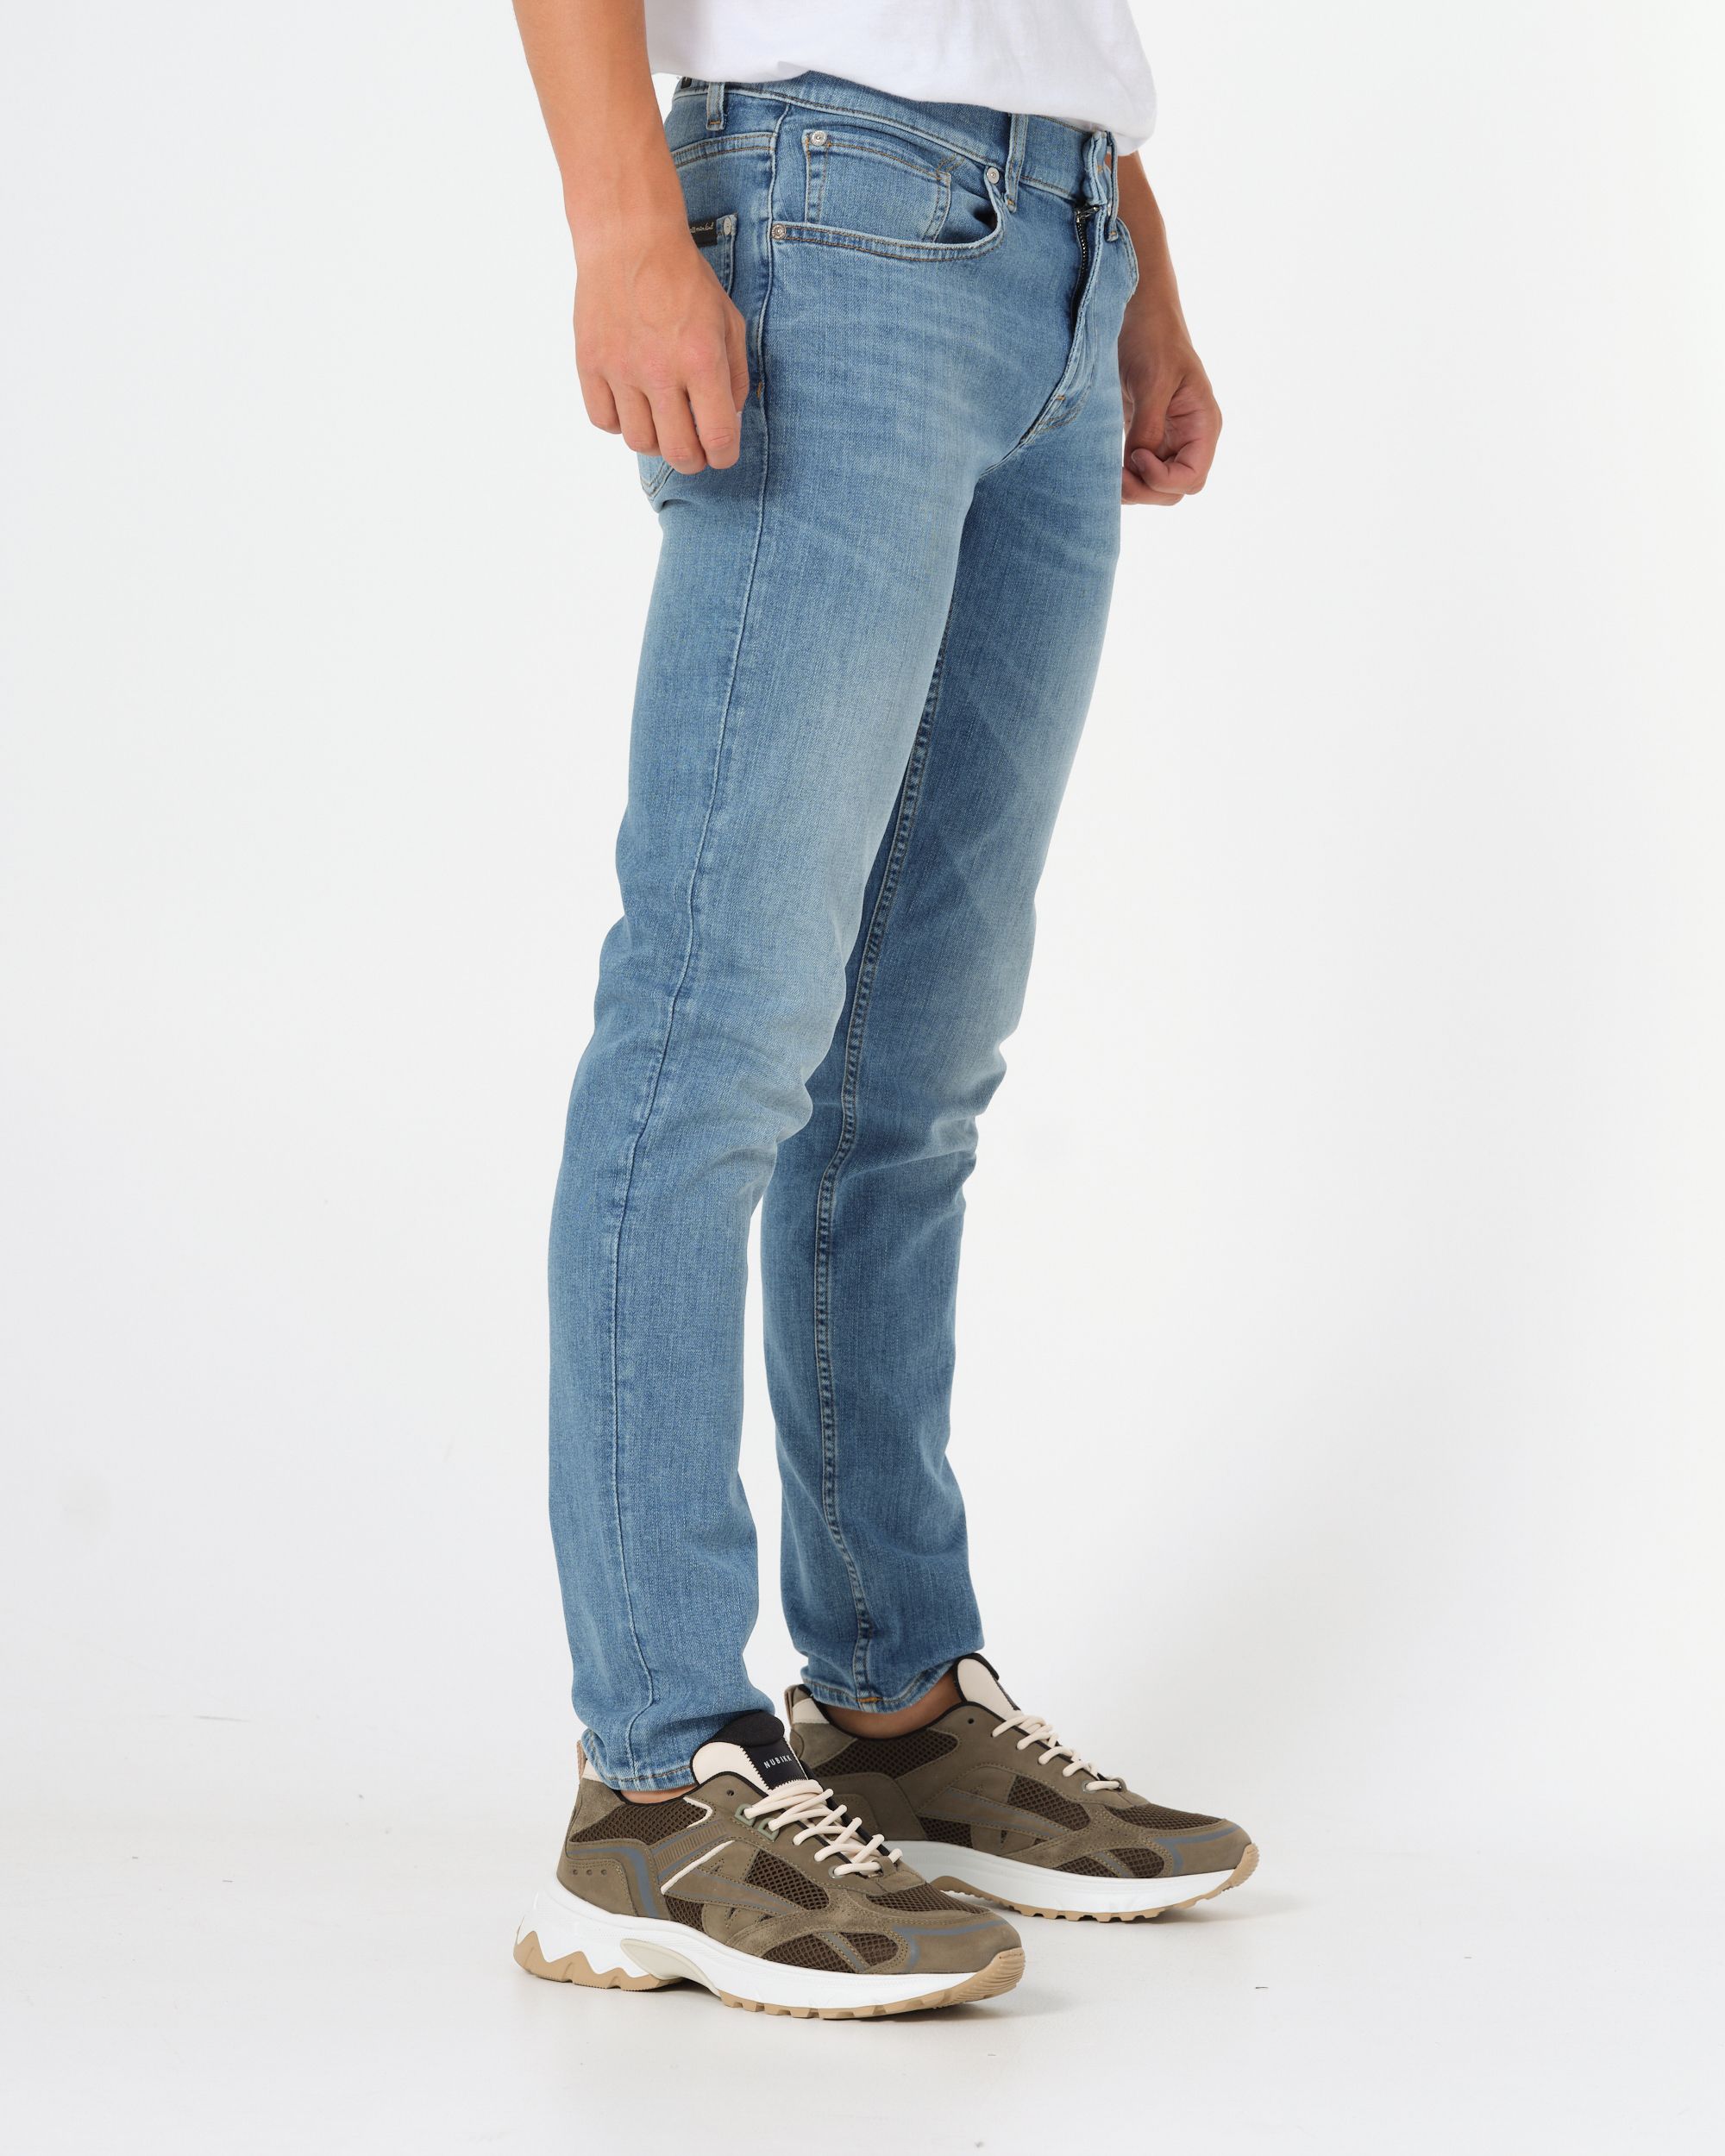 Seven for all mankind Puzzle Jeans Blauw 089205-001-30